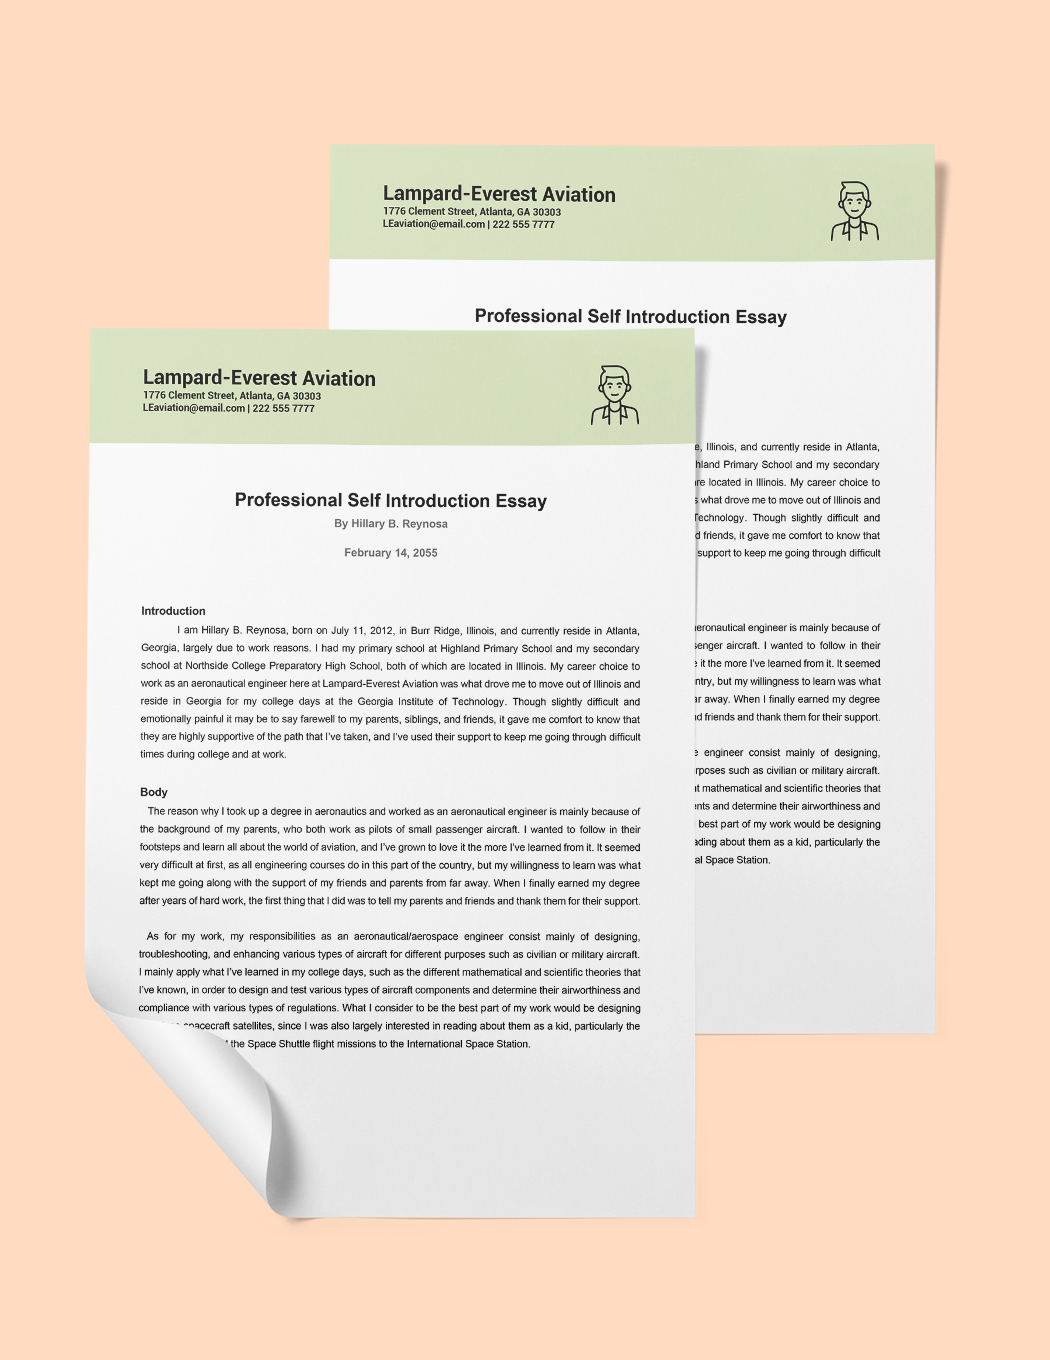 Professional Self Introduction Essay Template